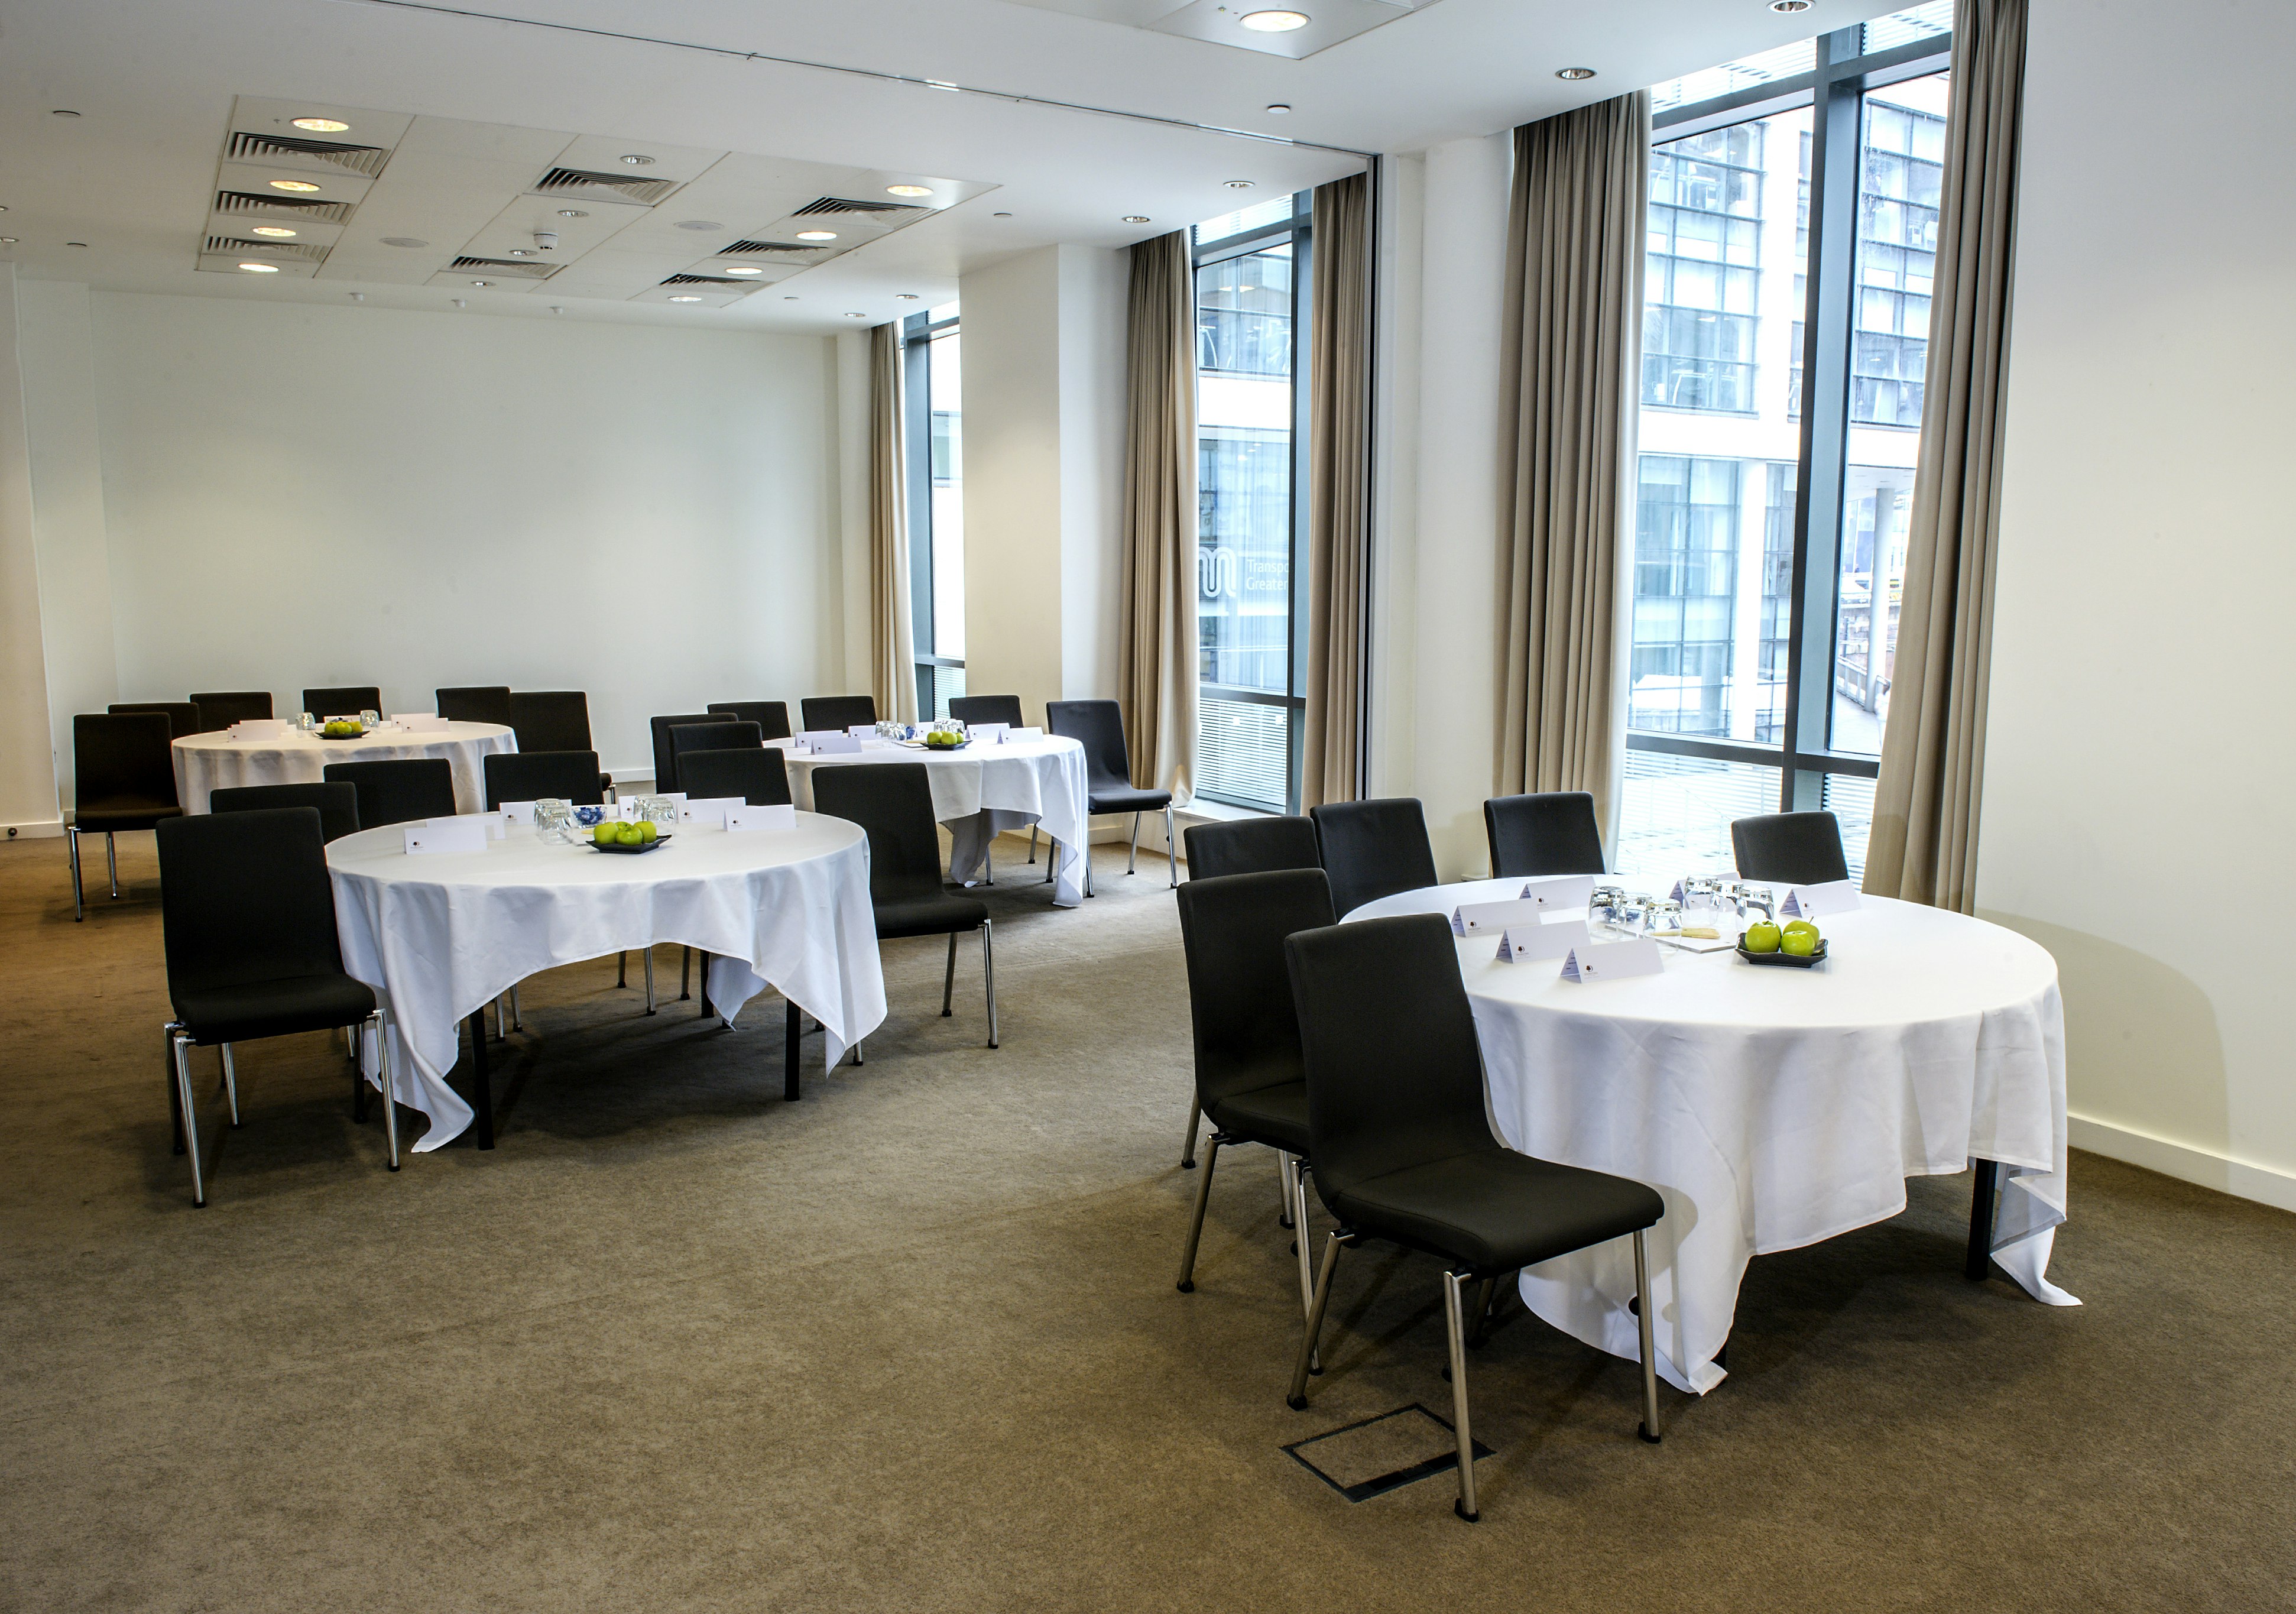 Hotel Conference Venues in Manchester - DoubleTree by Hilton Manchester